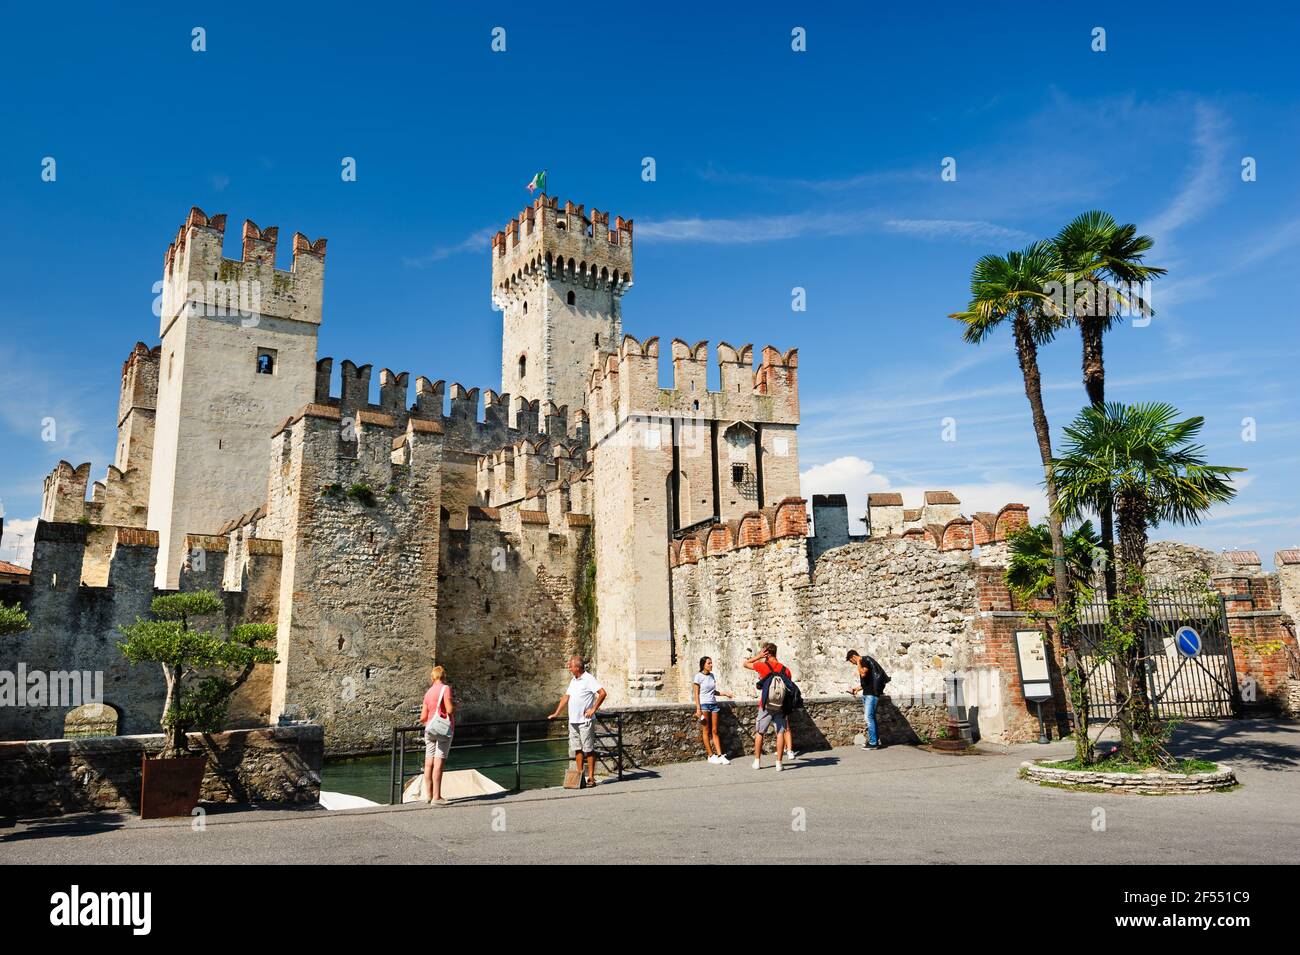 Medieval castle Scaliger in old town Sirmione on lake Lago di Garda, northern Italy Stock Photo